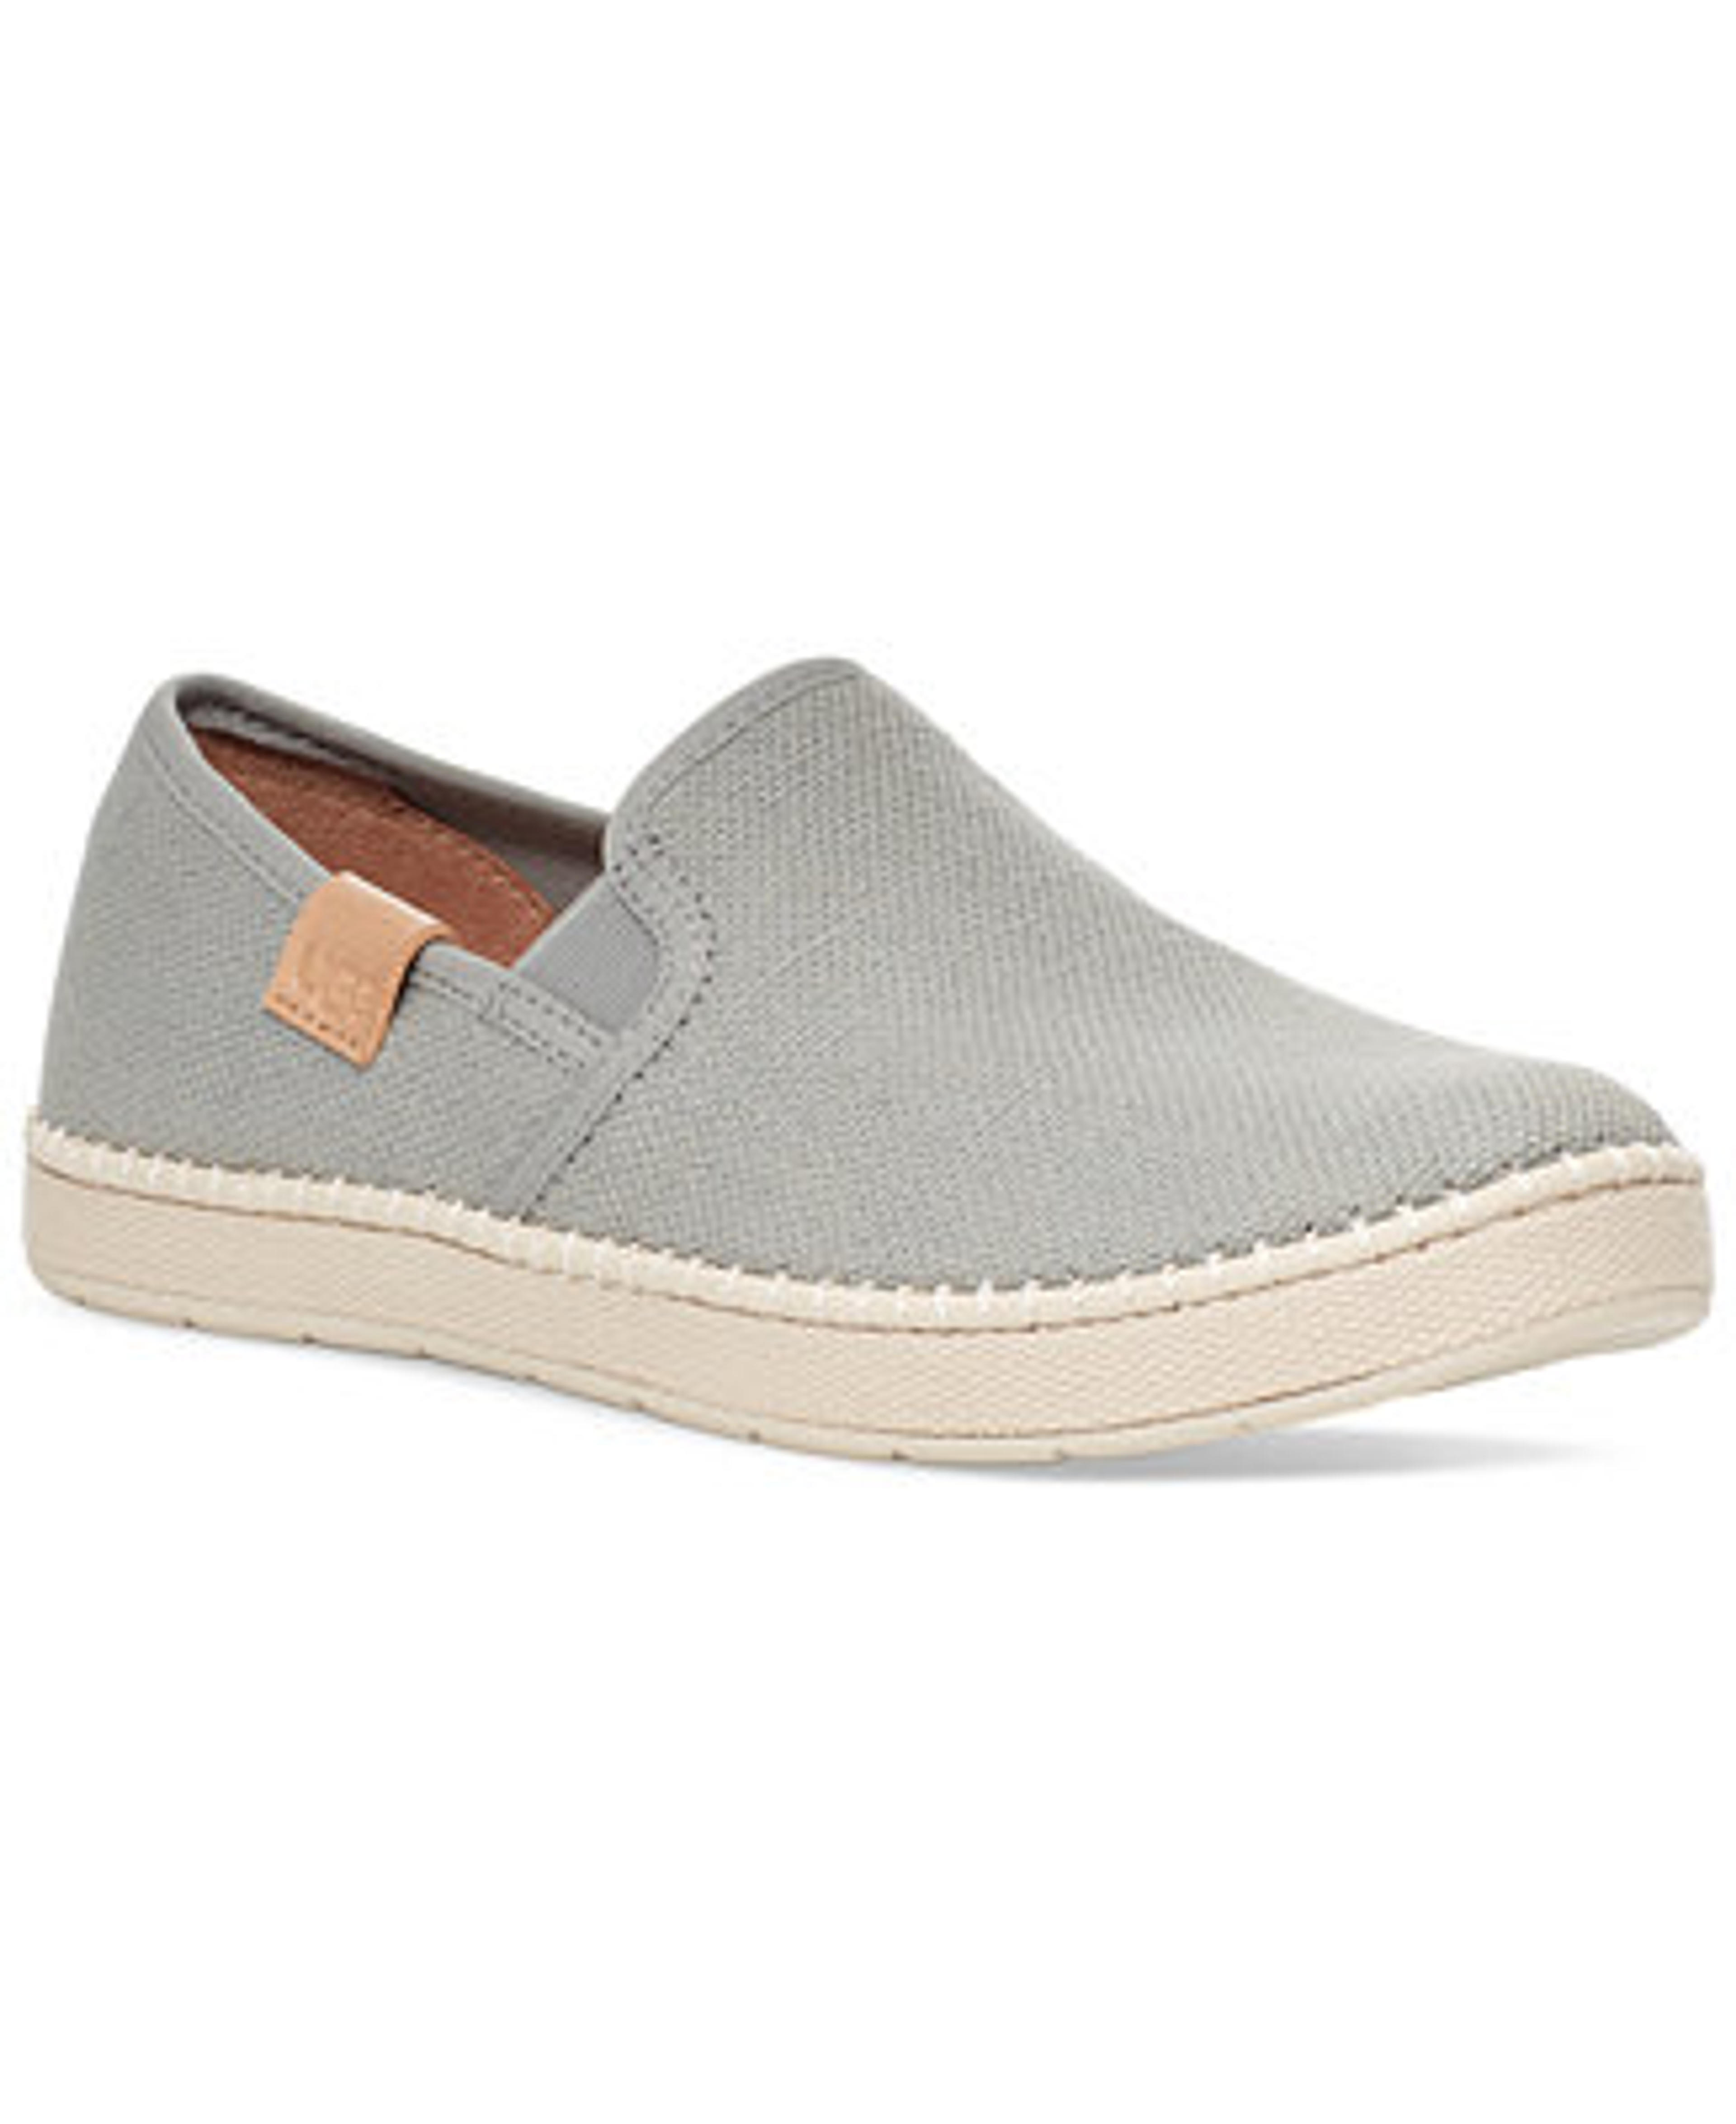 UGG® Luciah Slip-On Sneakers & Reviews - Athletic Shoes & Sneakers - Shoes - Macy's